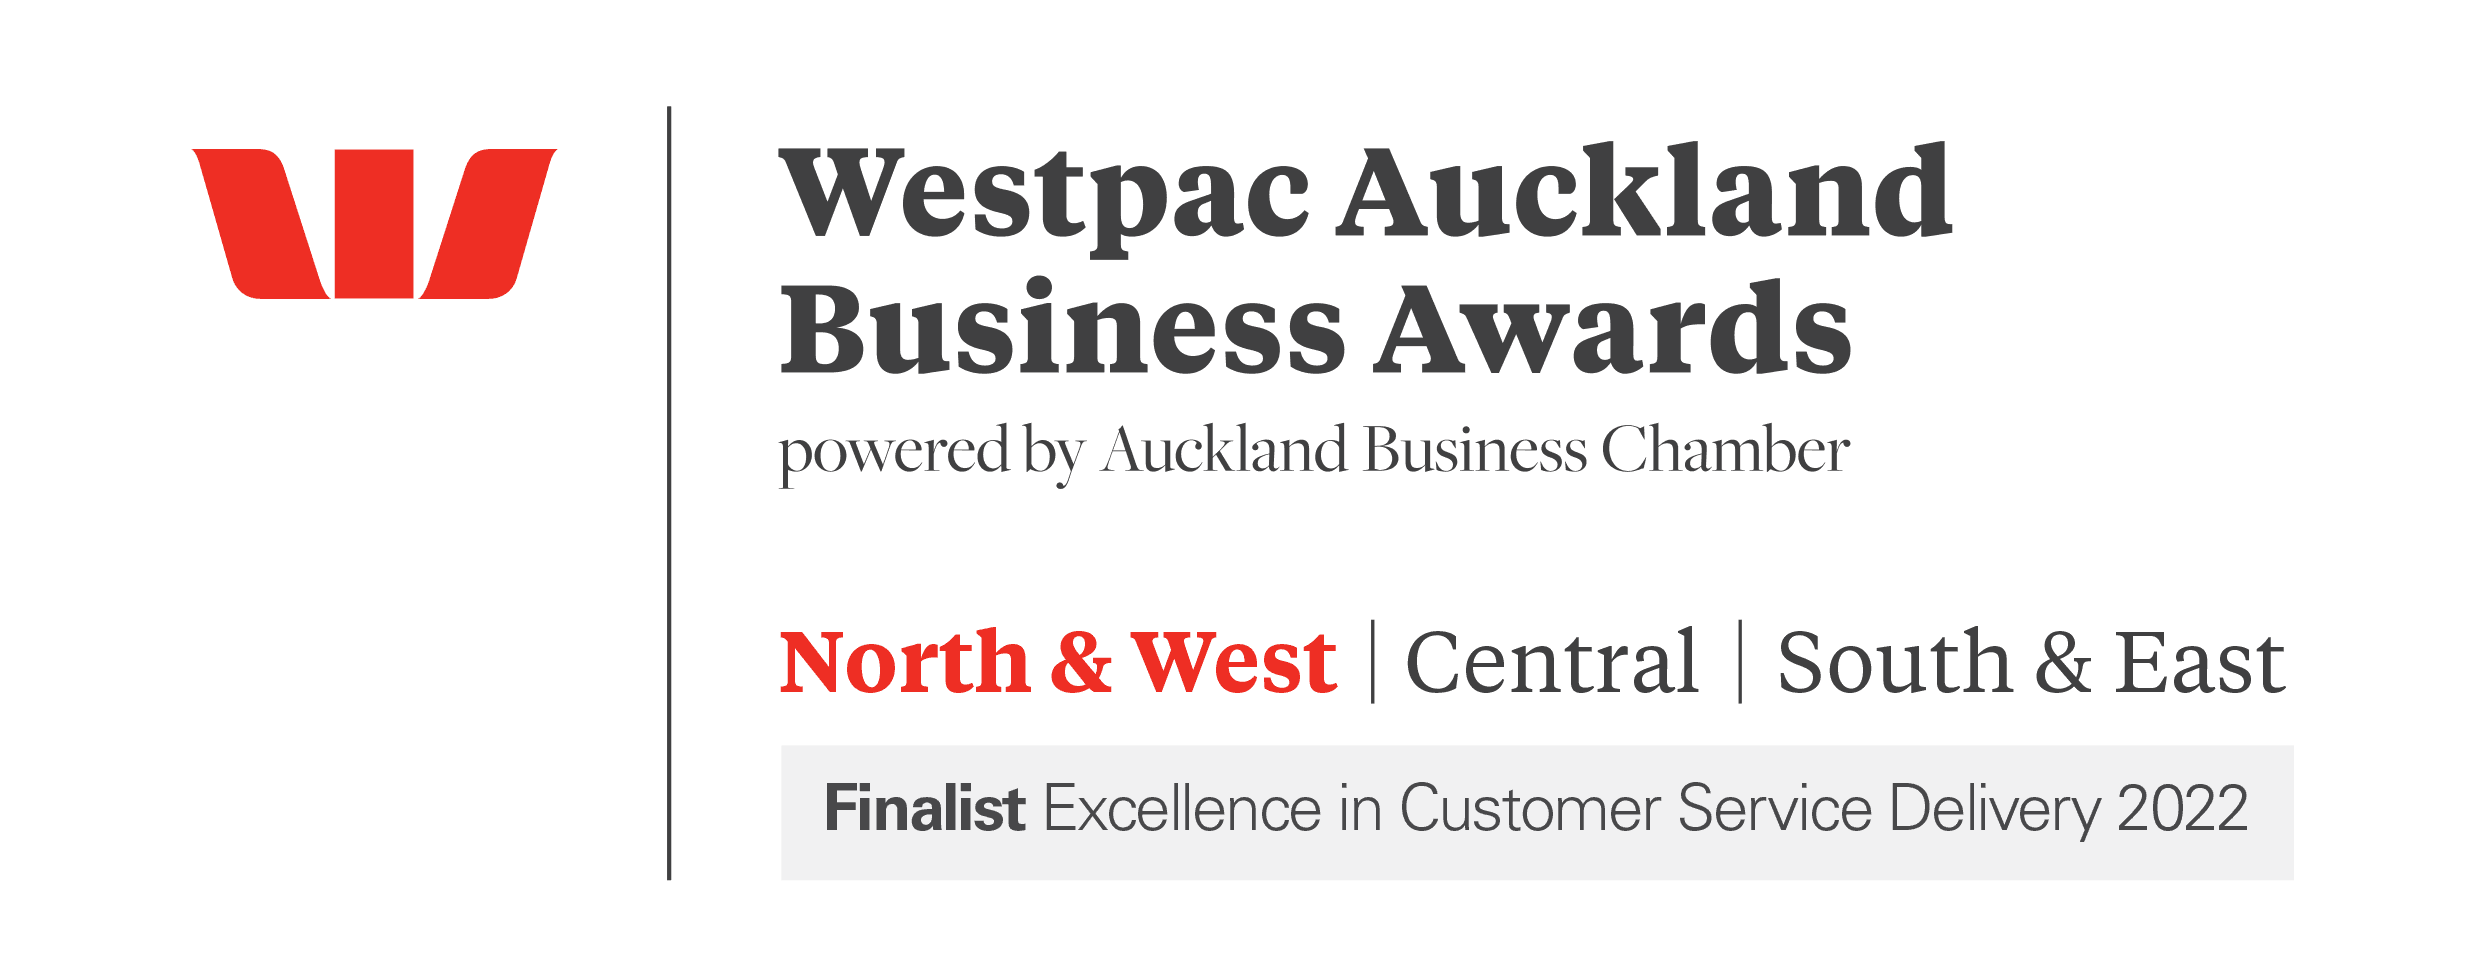 Four Words as a Finalist for Excellence in Customer Service Delivery 2022 at Westpac Auckland Business Awards